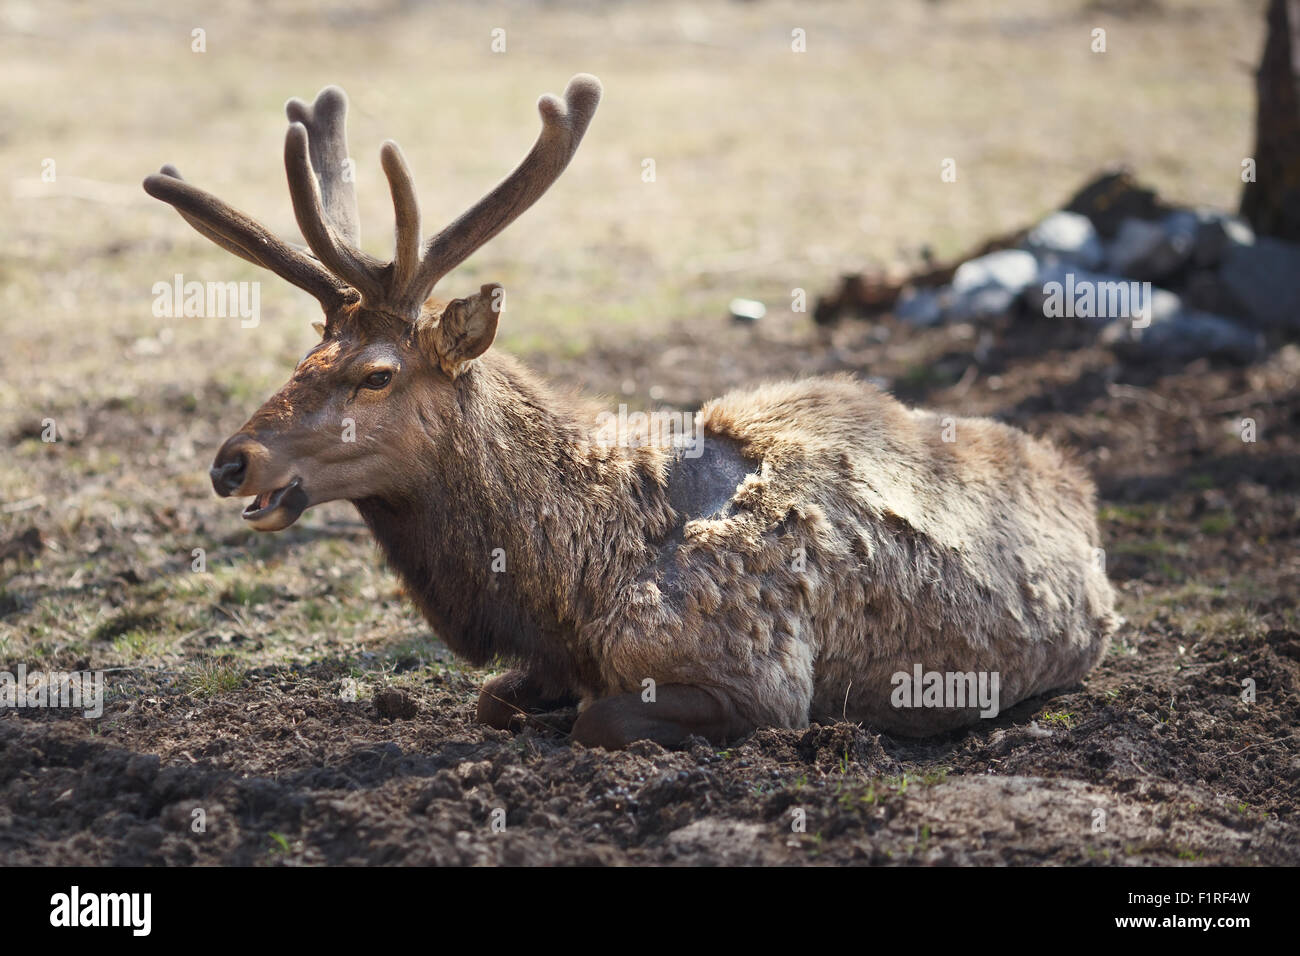 Young siberian stag with antlers (cervus elaphus) also known both as maral or red deer lying on the ground in their natural habi Stock Photo